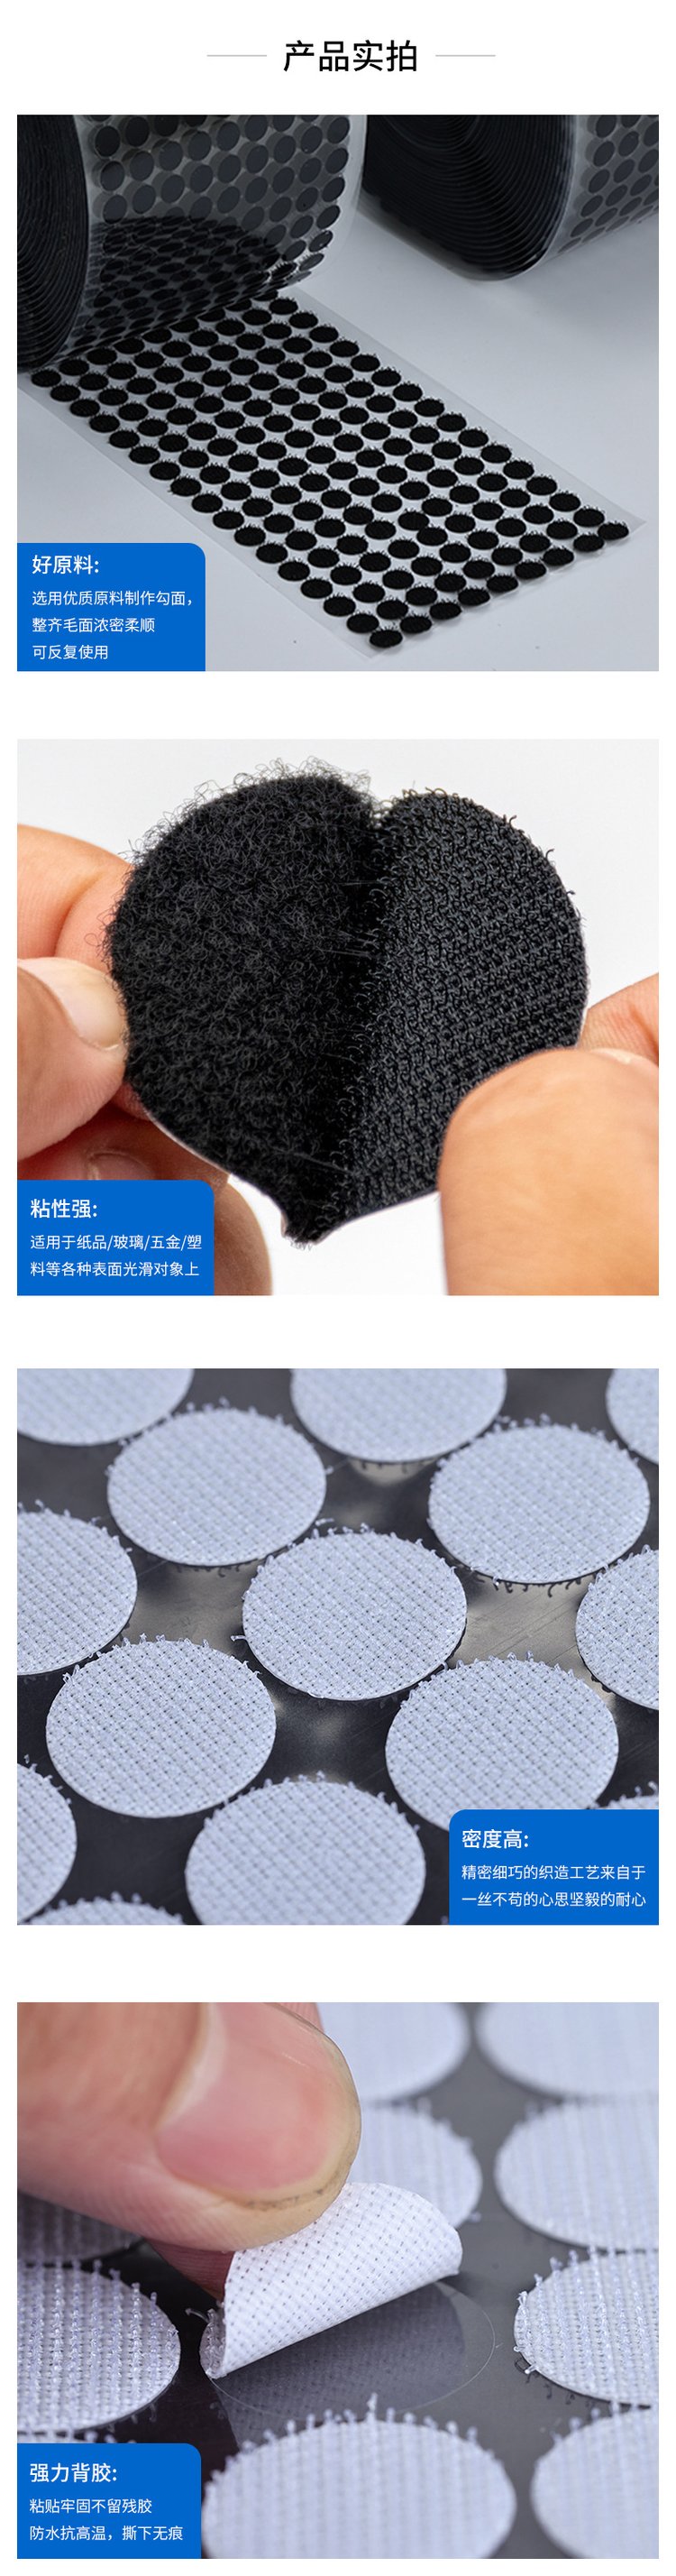 Back adhesive circular Velcro, nylon self-adhesive, traceless bed sheets, carpet, mother button, baby Velcro